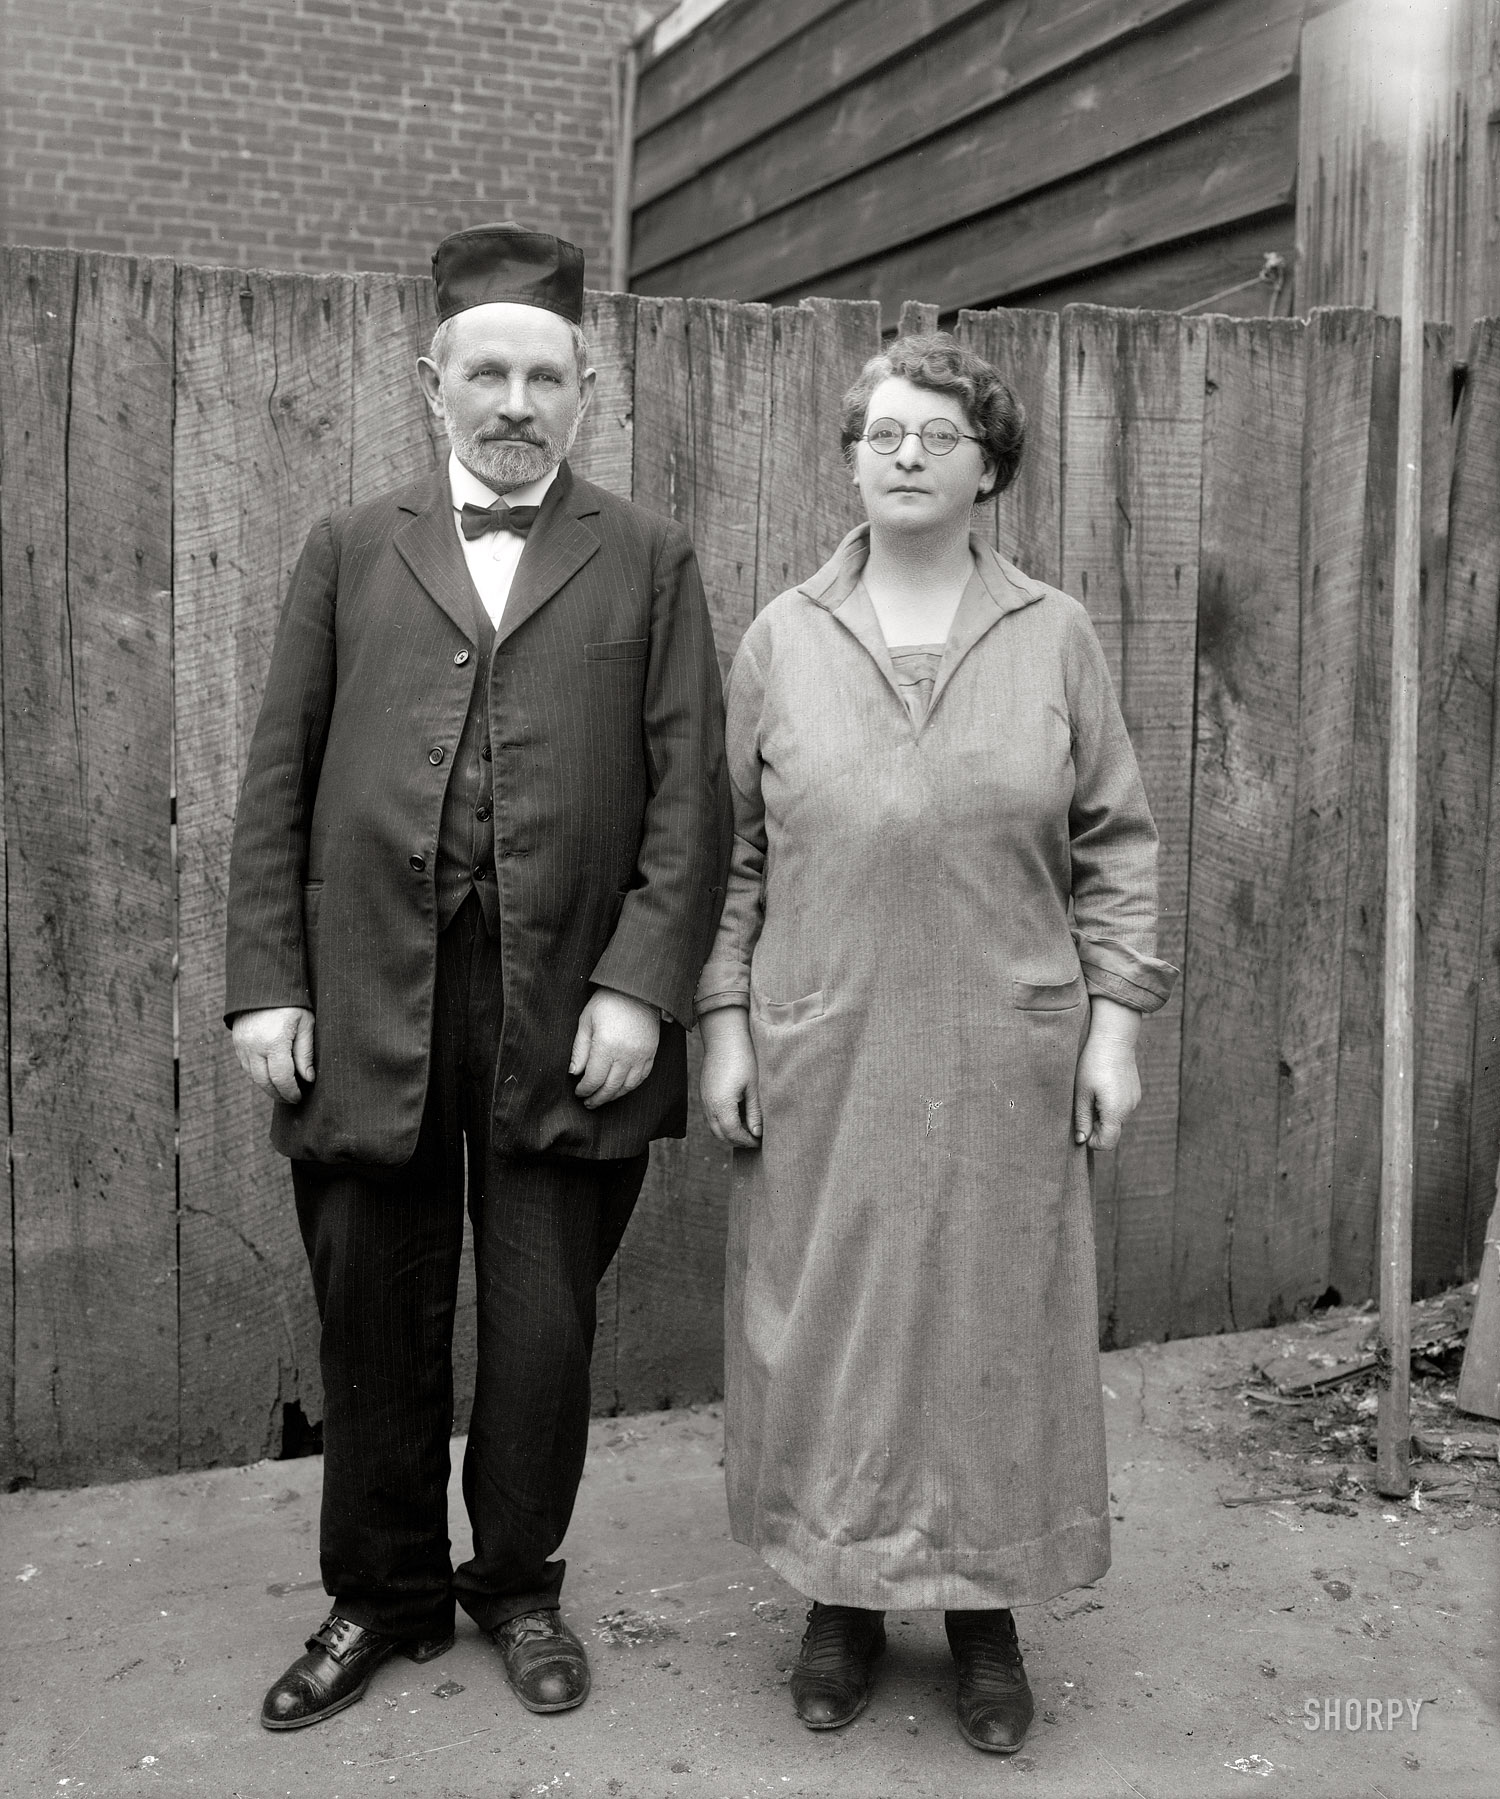 Washington, D.C., circa 1927. "Al Jolson's parents." Rabbi Moses Yoelson and wife Ida, the actor's stepmother. Harris & Ewing glass negative. View full size.